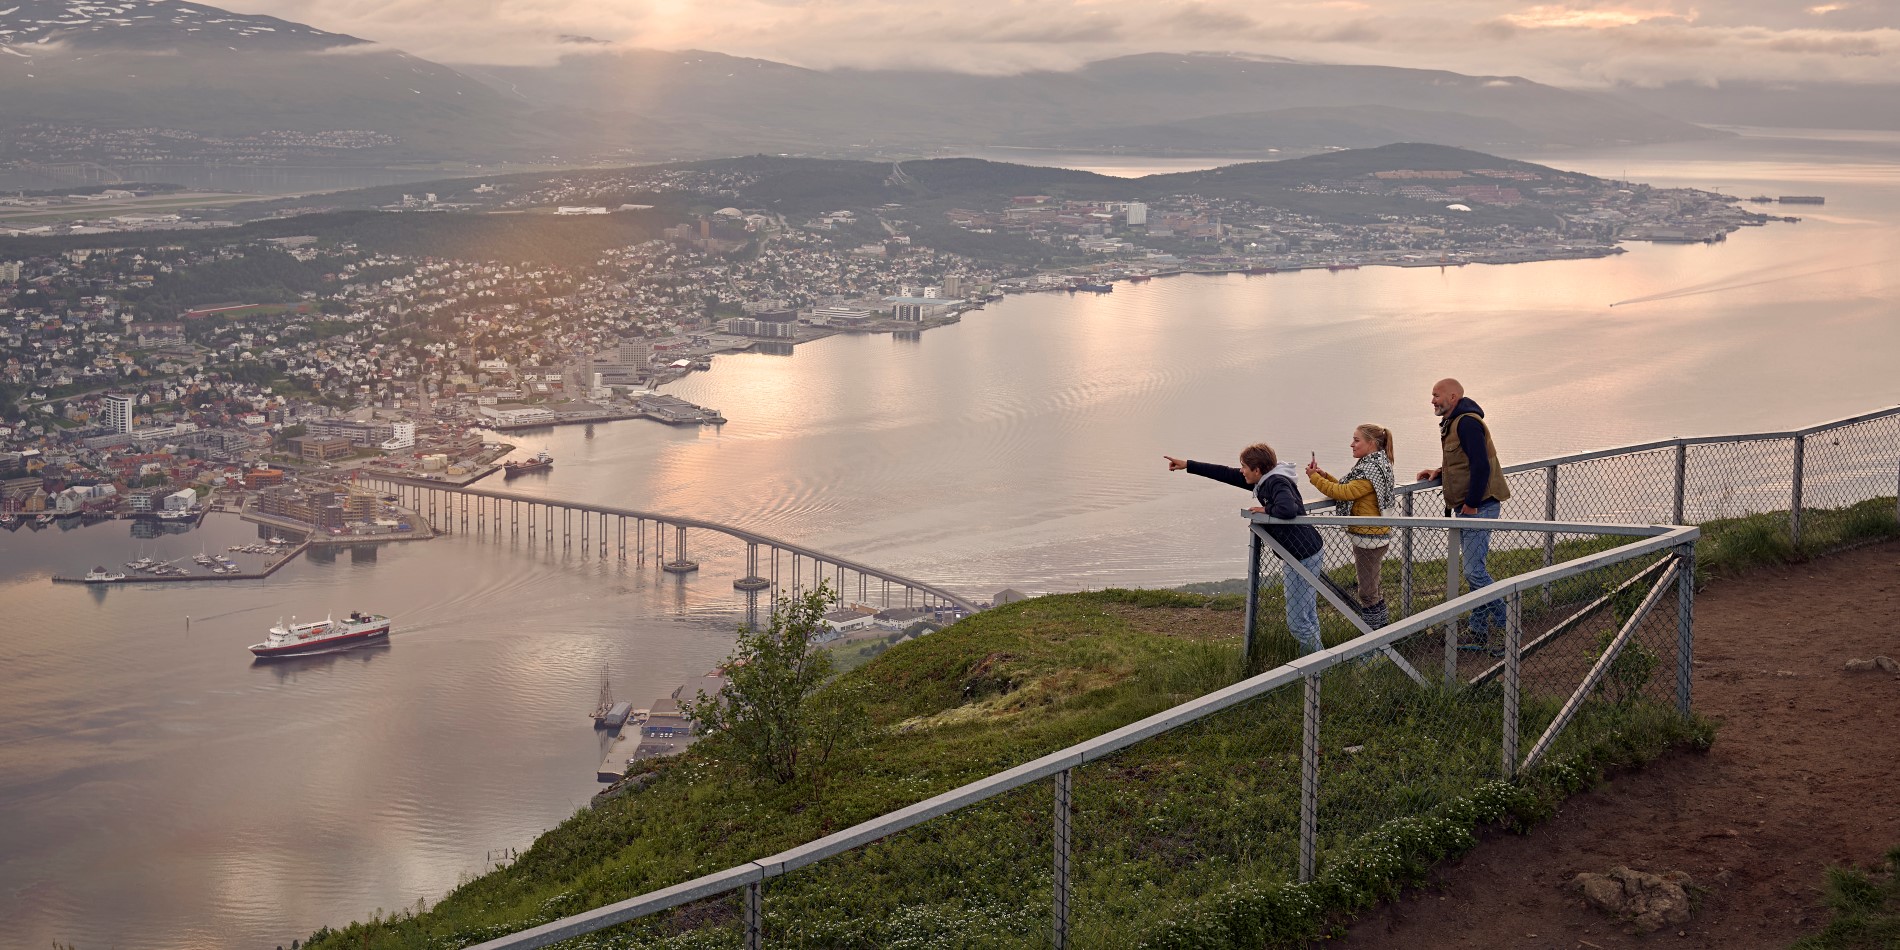 Three children stand behind the fence on top of the mountain in the city of Tromsø. They are overlooking the city of Tromsø.